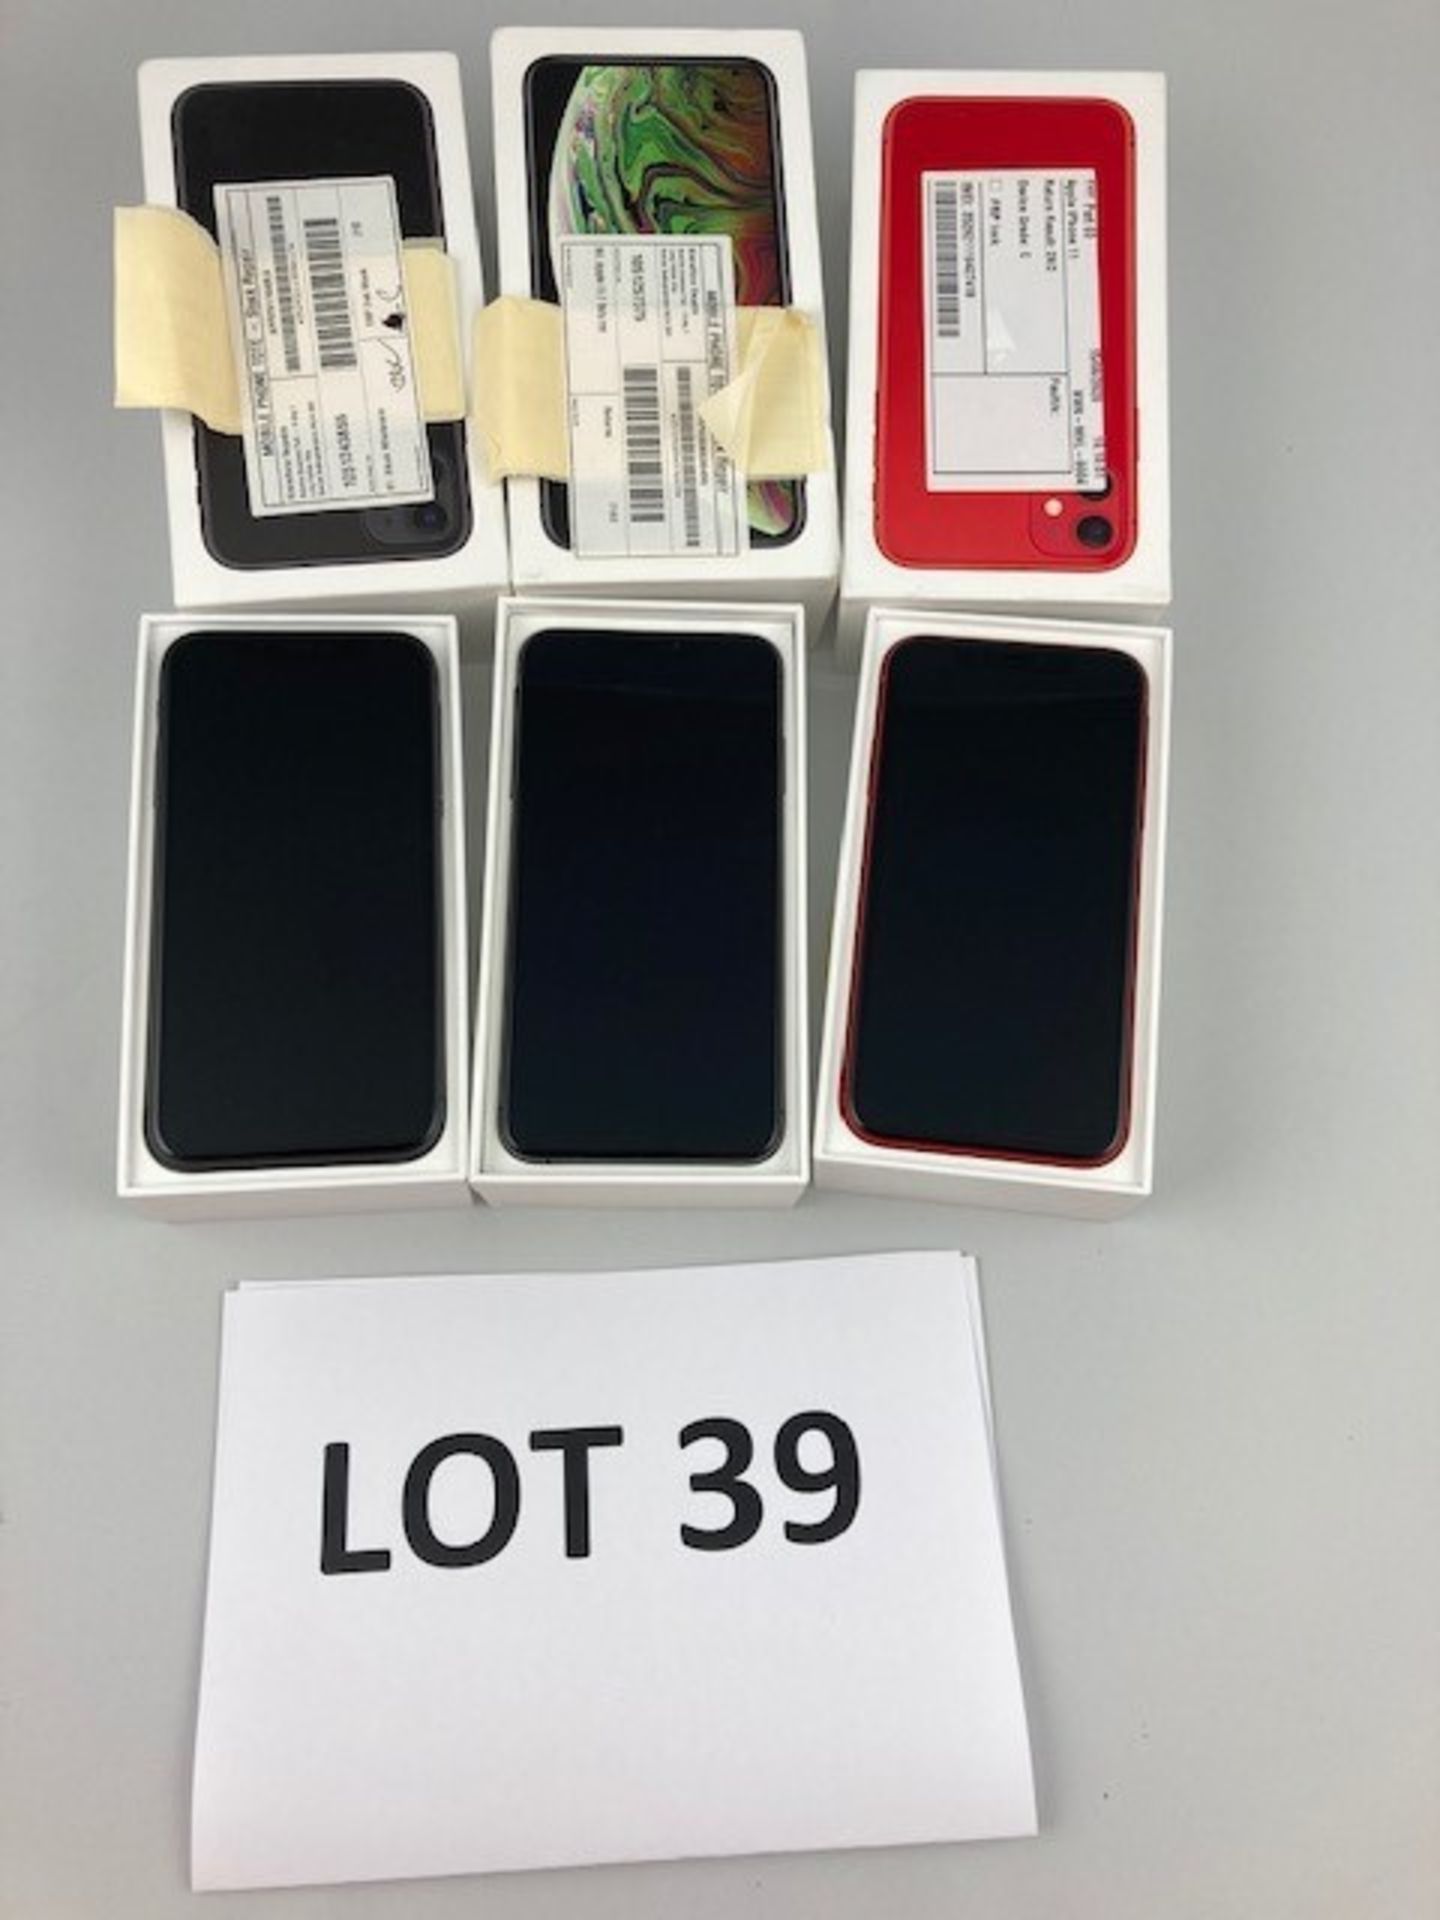 Box of 3 Apple Iphones. Latest selling price £ *2,287